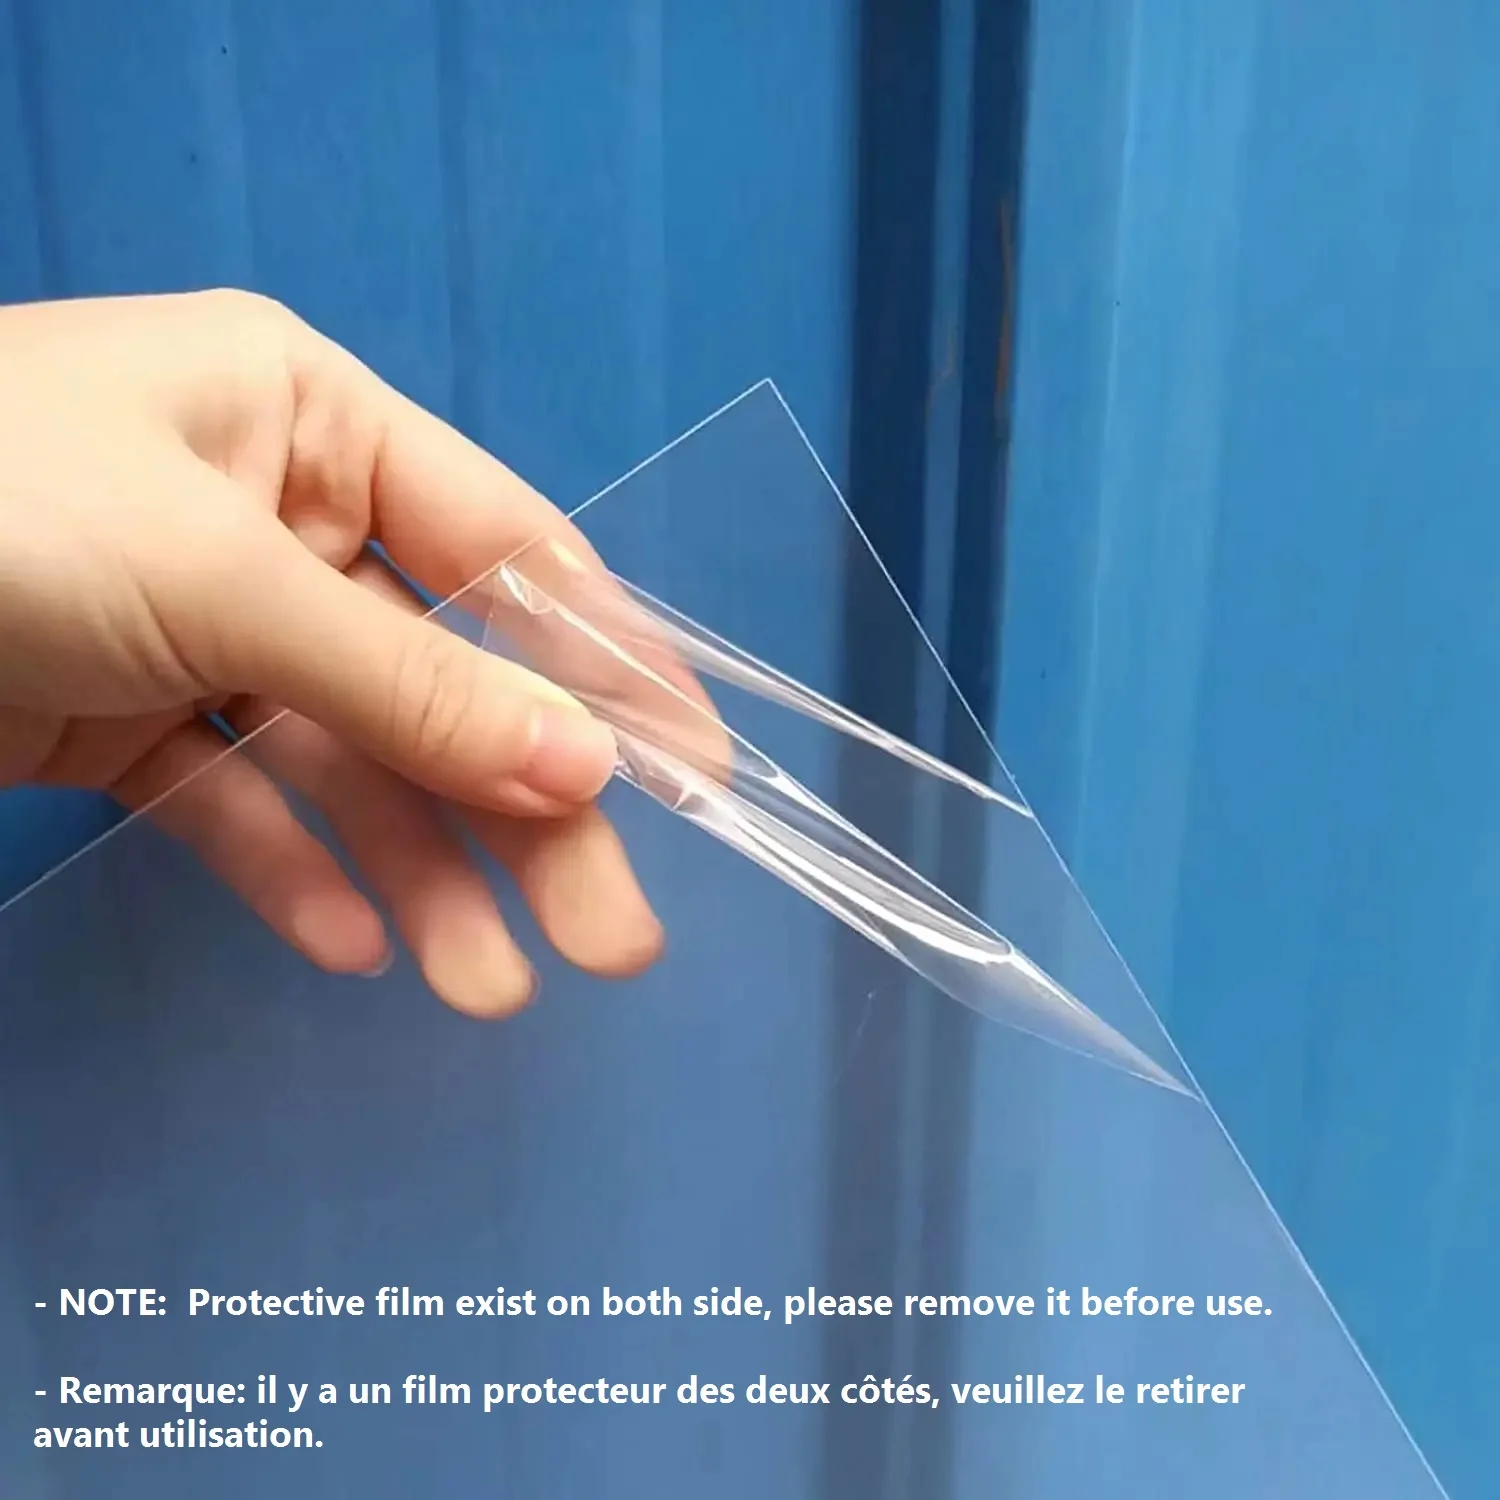 Size A4 Transparency PVC Binding Cover Clear Plastic Acetate Sheets With Protective Film On Both Side - Thickness 200micron